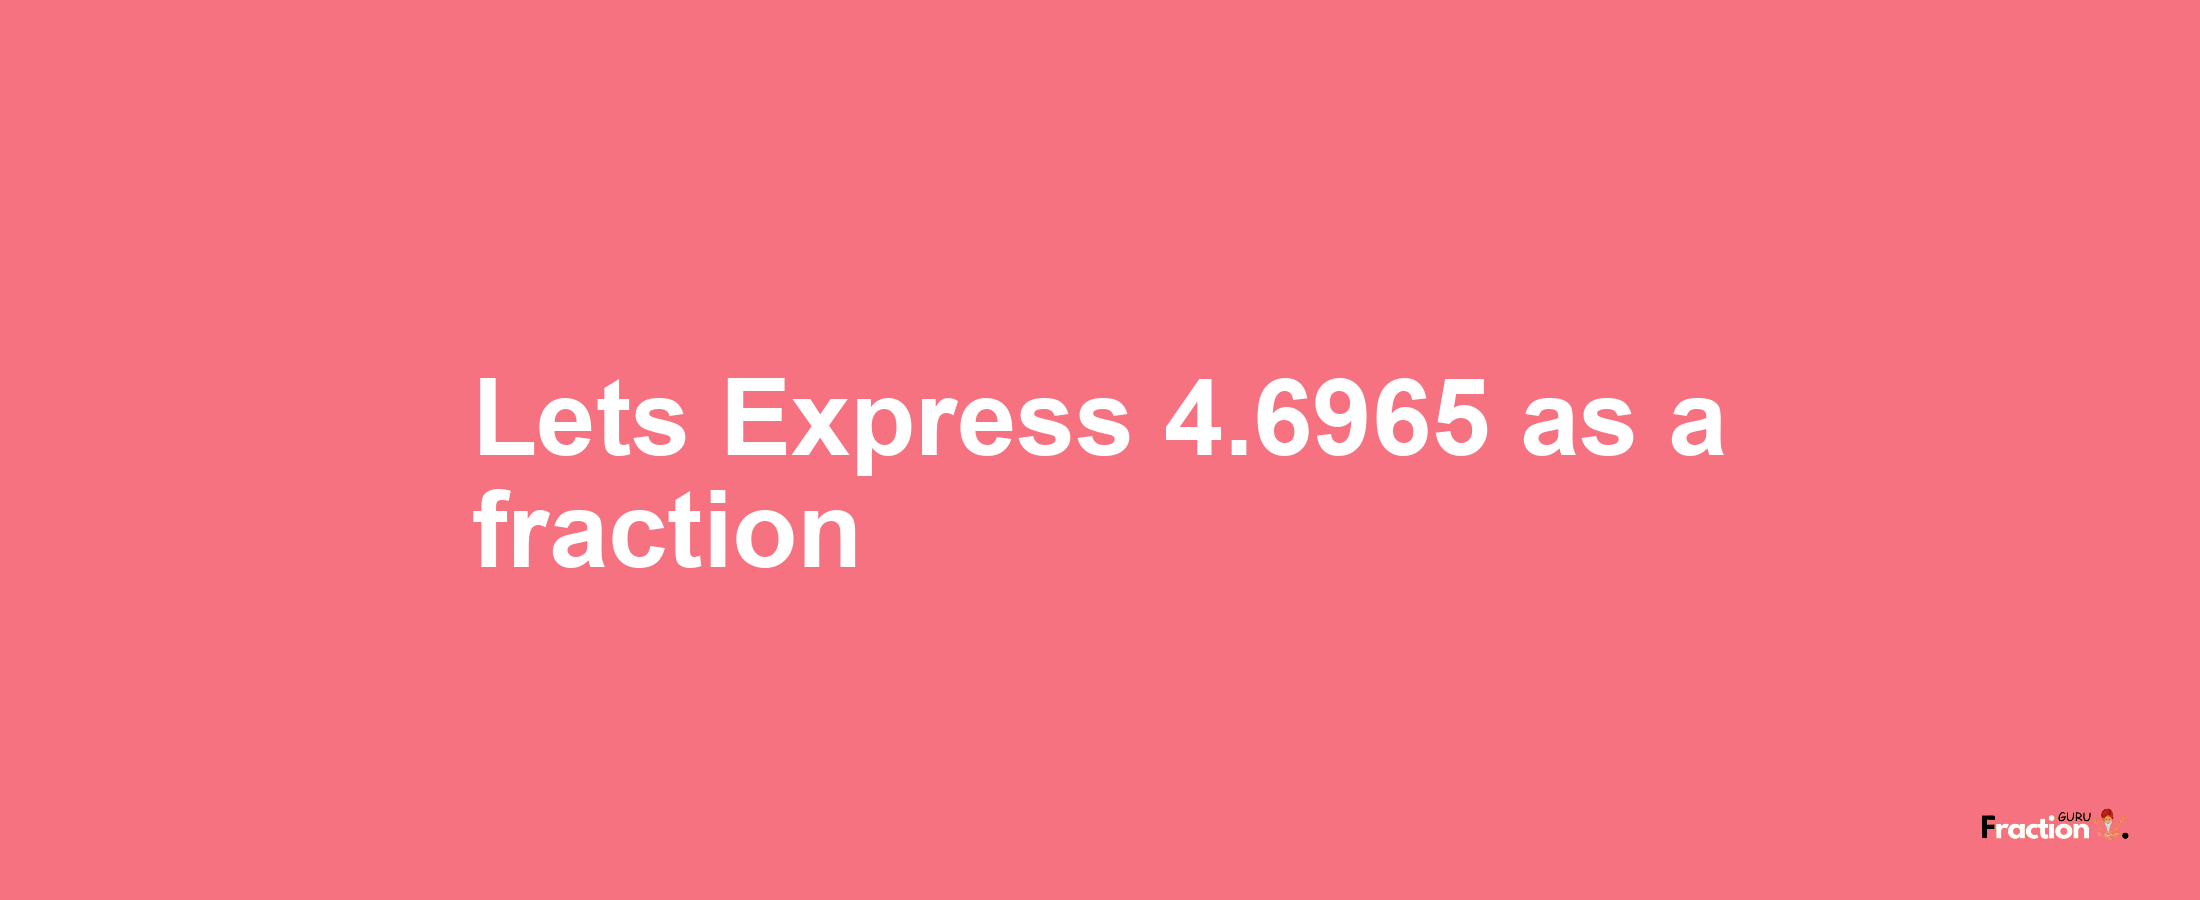 Lets Express 4.6965 as afraction